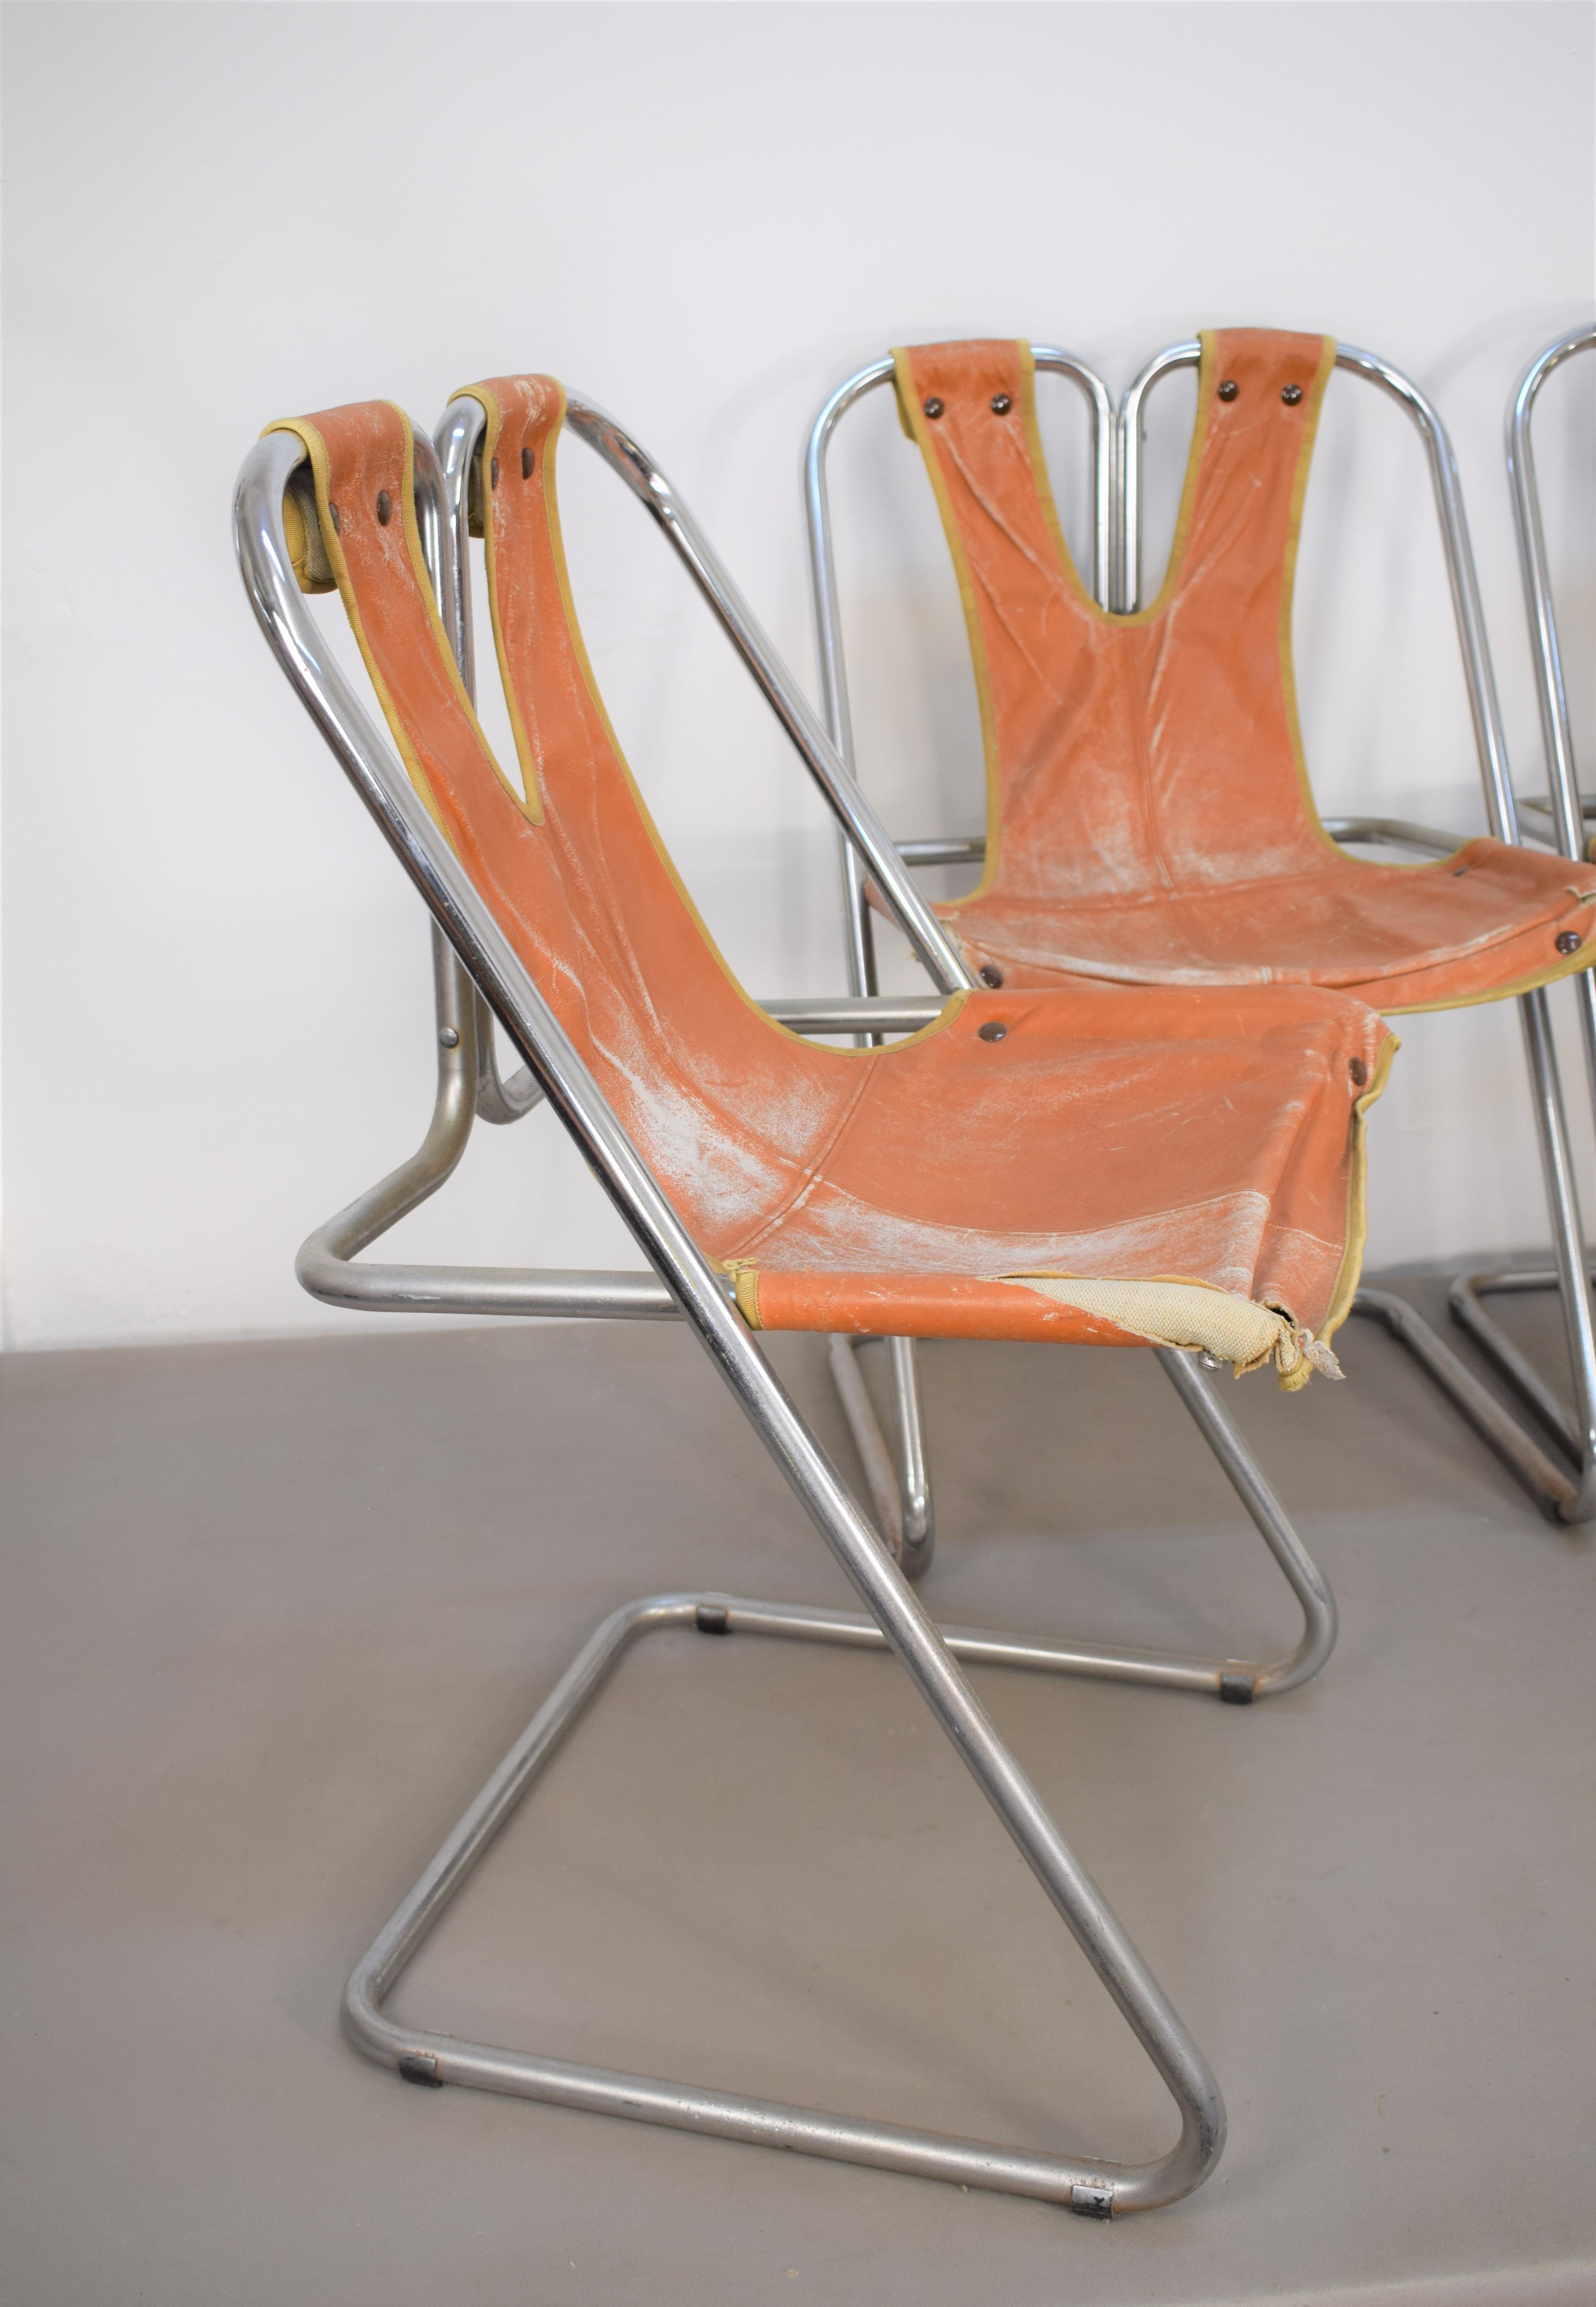 Steel & leather dining chairs, 1970s, set of 4.


Dimensions: H= 83 cm; W= 50 cm; D= 50 cm; 
Seat height : 48 cm.